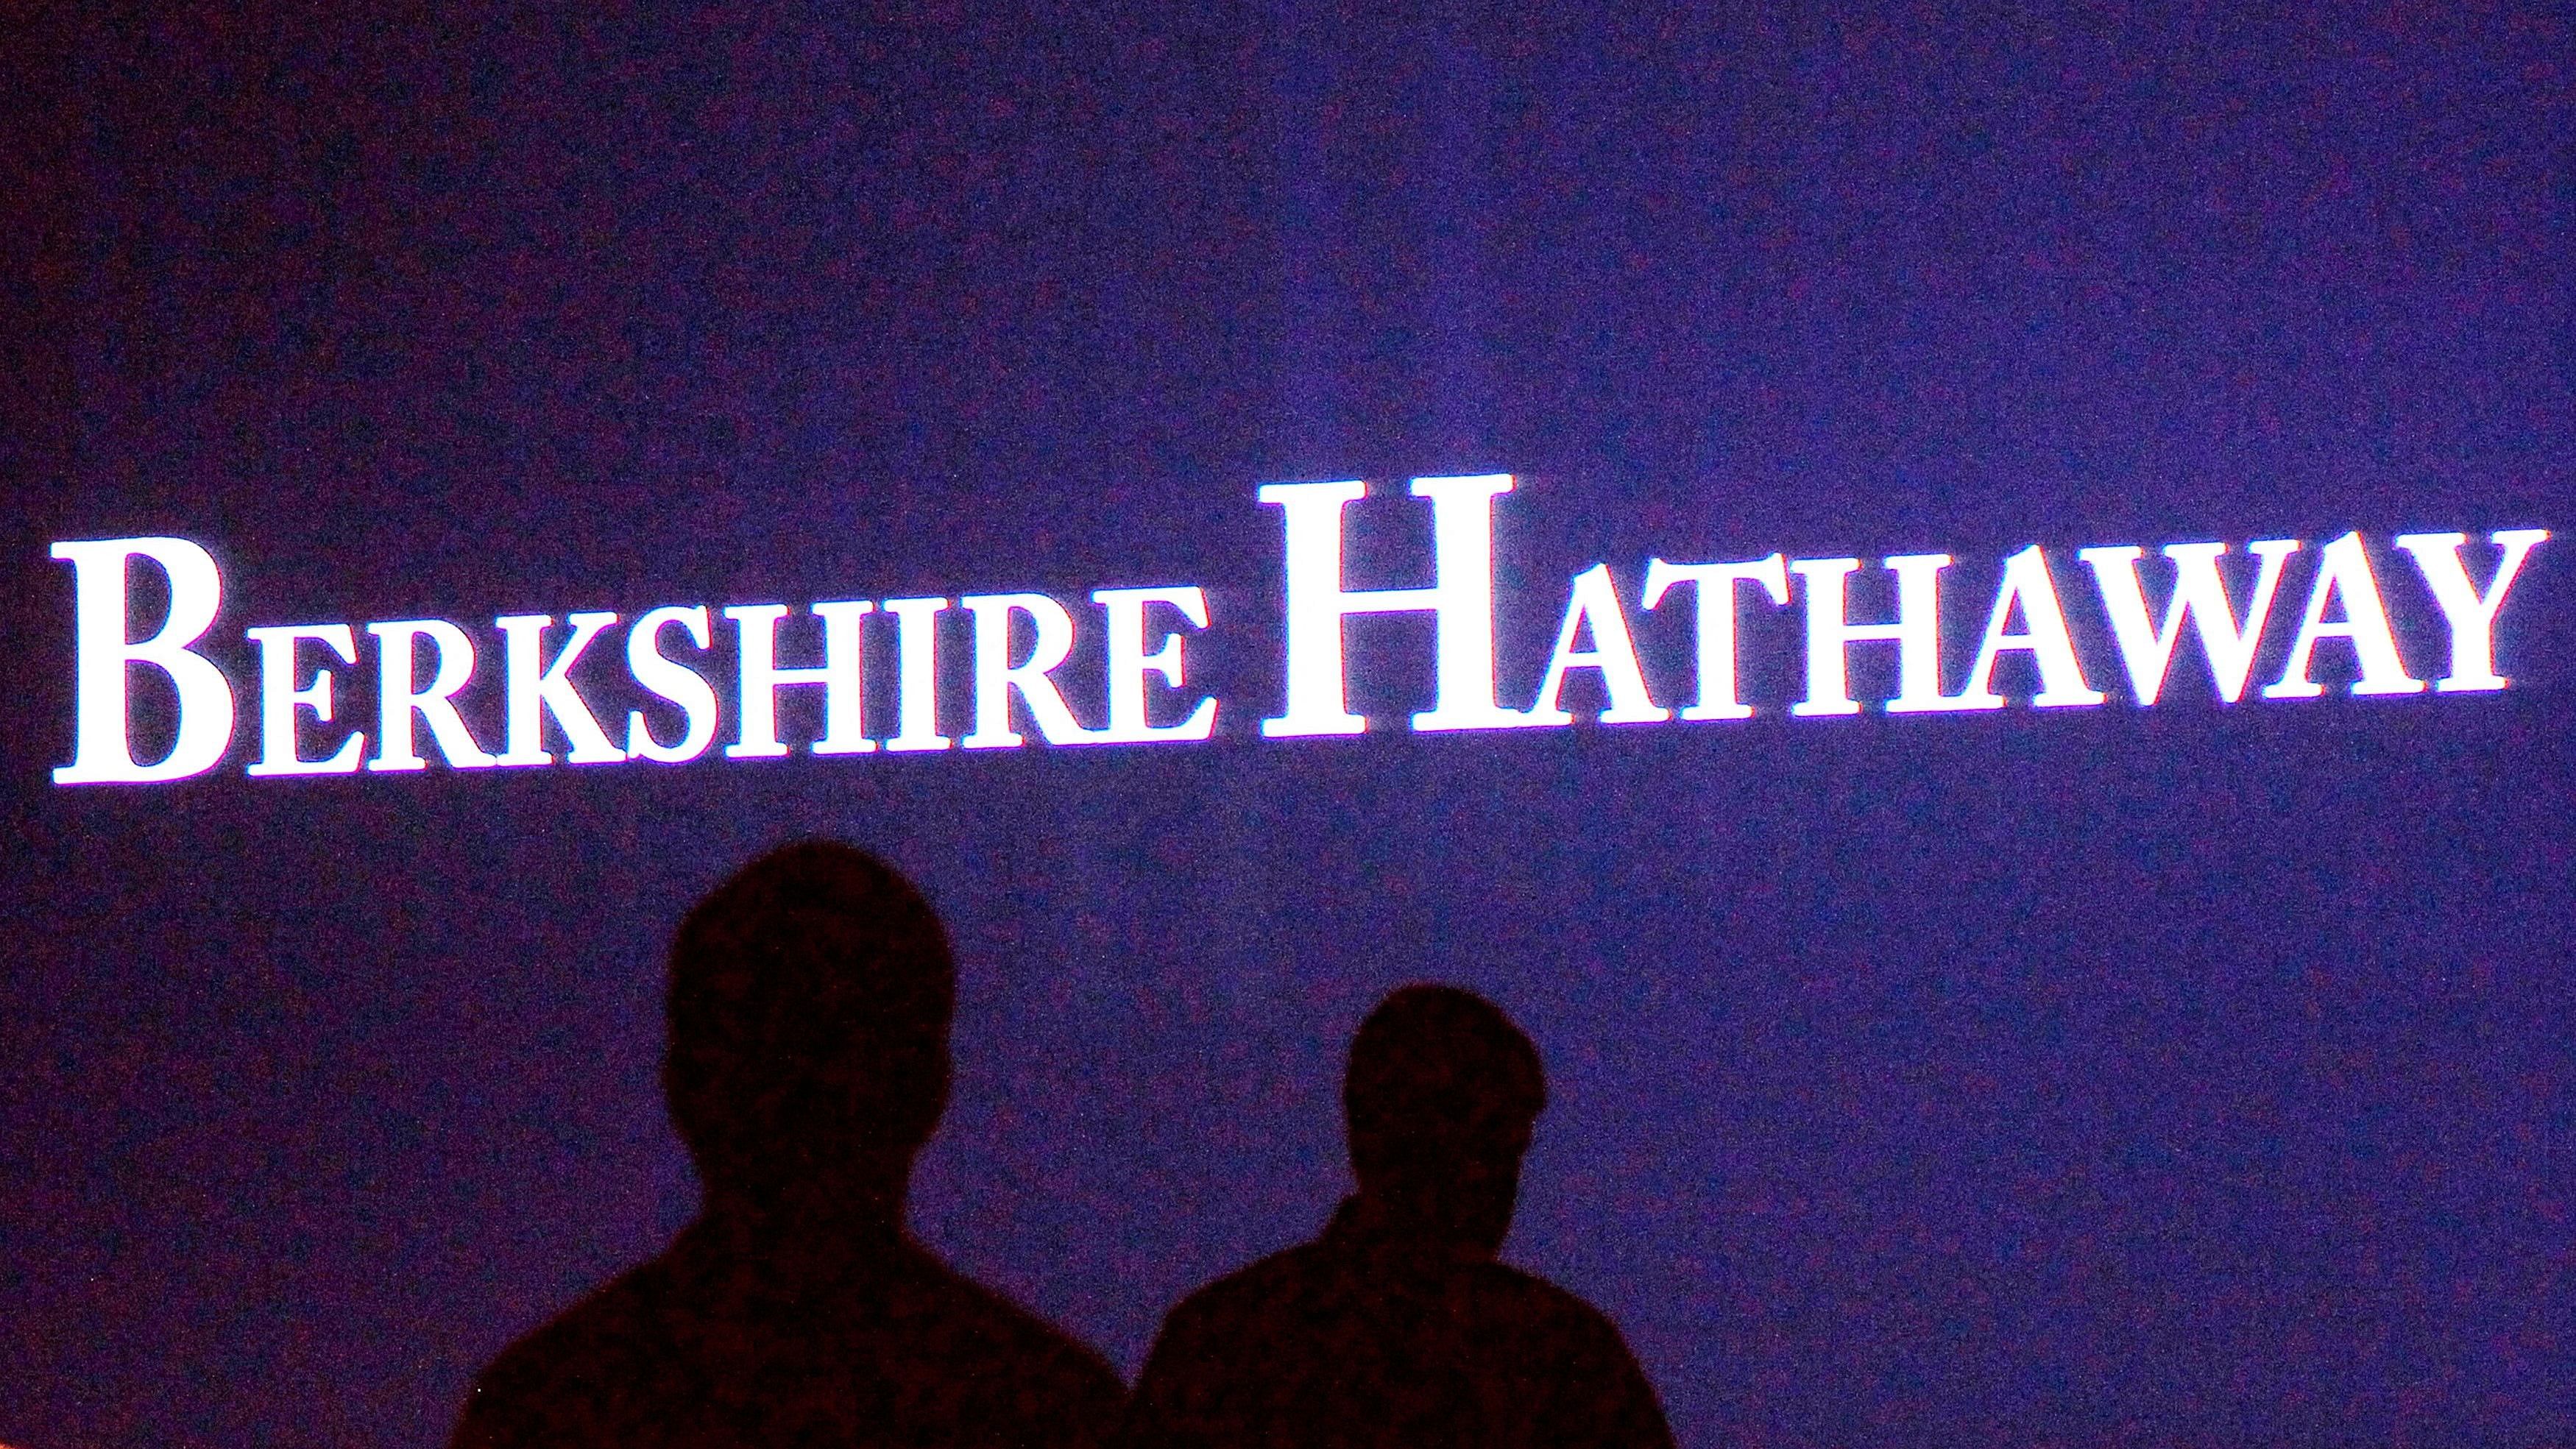 Berkshire Hathaway has offered $848.02 for each share of Alleghany, a premium of more than 25 per cent to the company's closing price on Friday. Credit: Reuters File Photo